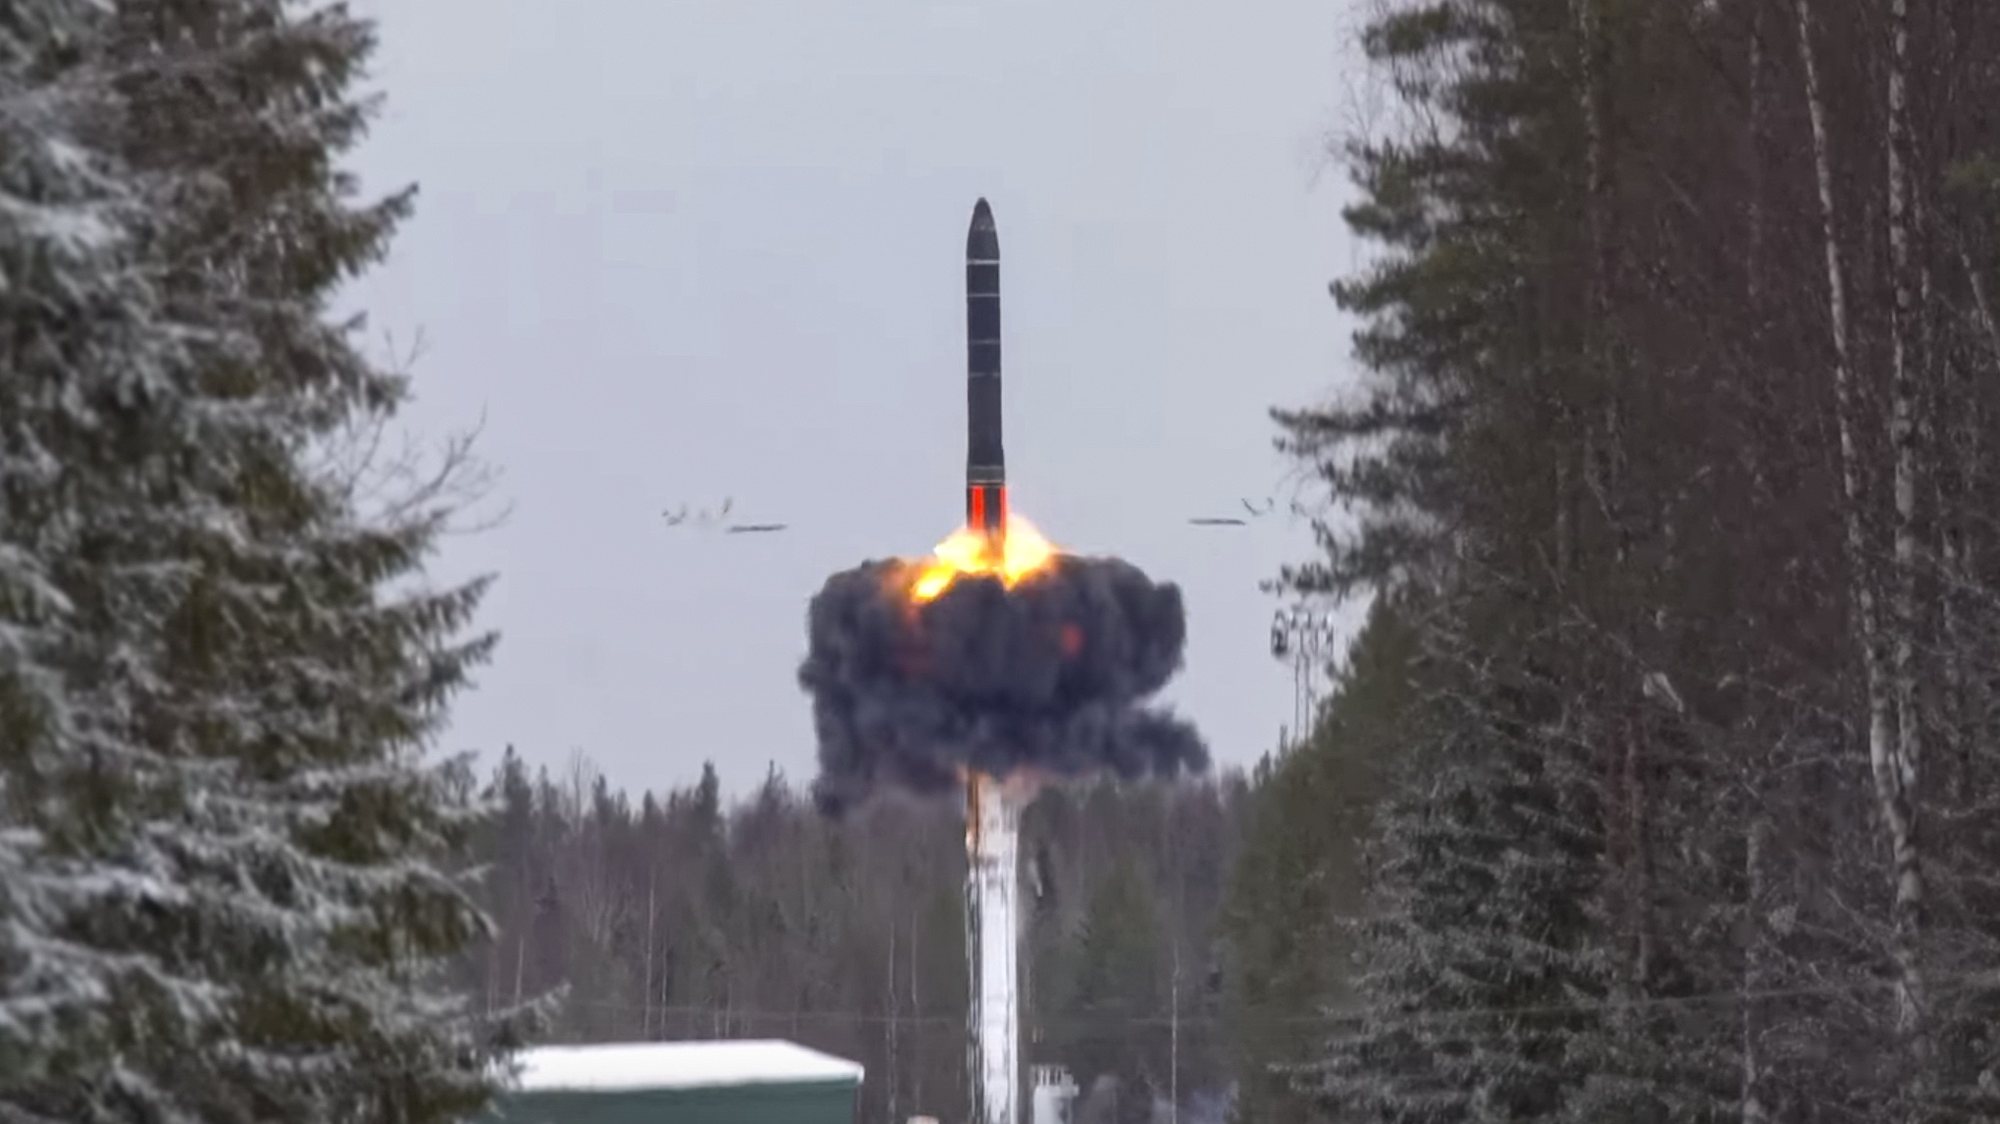 epa09771985 A handout still image taken from handout video made available by the Russian Defence ministry press-service shows launch of the intercontinental ballistic missile &#039;Yar&#039; from Plesetsk at the Kura training ground, Russia, 19 February 2022. Russian President Vladimir Putin opens exercises of the Russian strategic deterrence forces with launches of the ballistic missiles. Russian Navy ships of the Northern and Black Sea Fleets launched &#039;Kalibr&#039; cruise missiles and &#039;Zirkon&#039; hypersonic missiles at sea and ground targets during scheduled exercises of the strategic deterrence forces on Saturday. The &#039;Yars&#039; intercontinental ballistic missile was launched from Plesetsk at the Kura training ground.  EPA/RUSSIAN DEFENCE MINISTRY PRESS SERVICE / HANDOUT  HANDOUT EDITORIAL USE ONLY/NO SALES